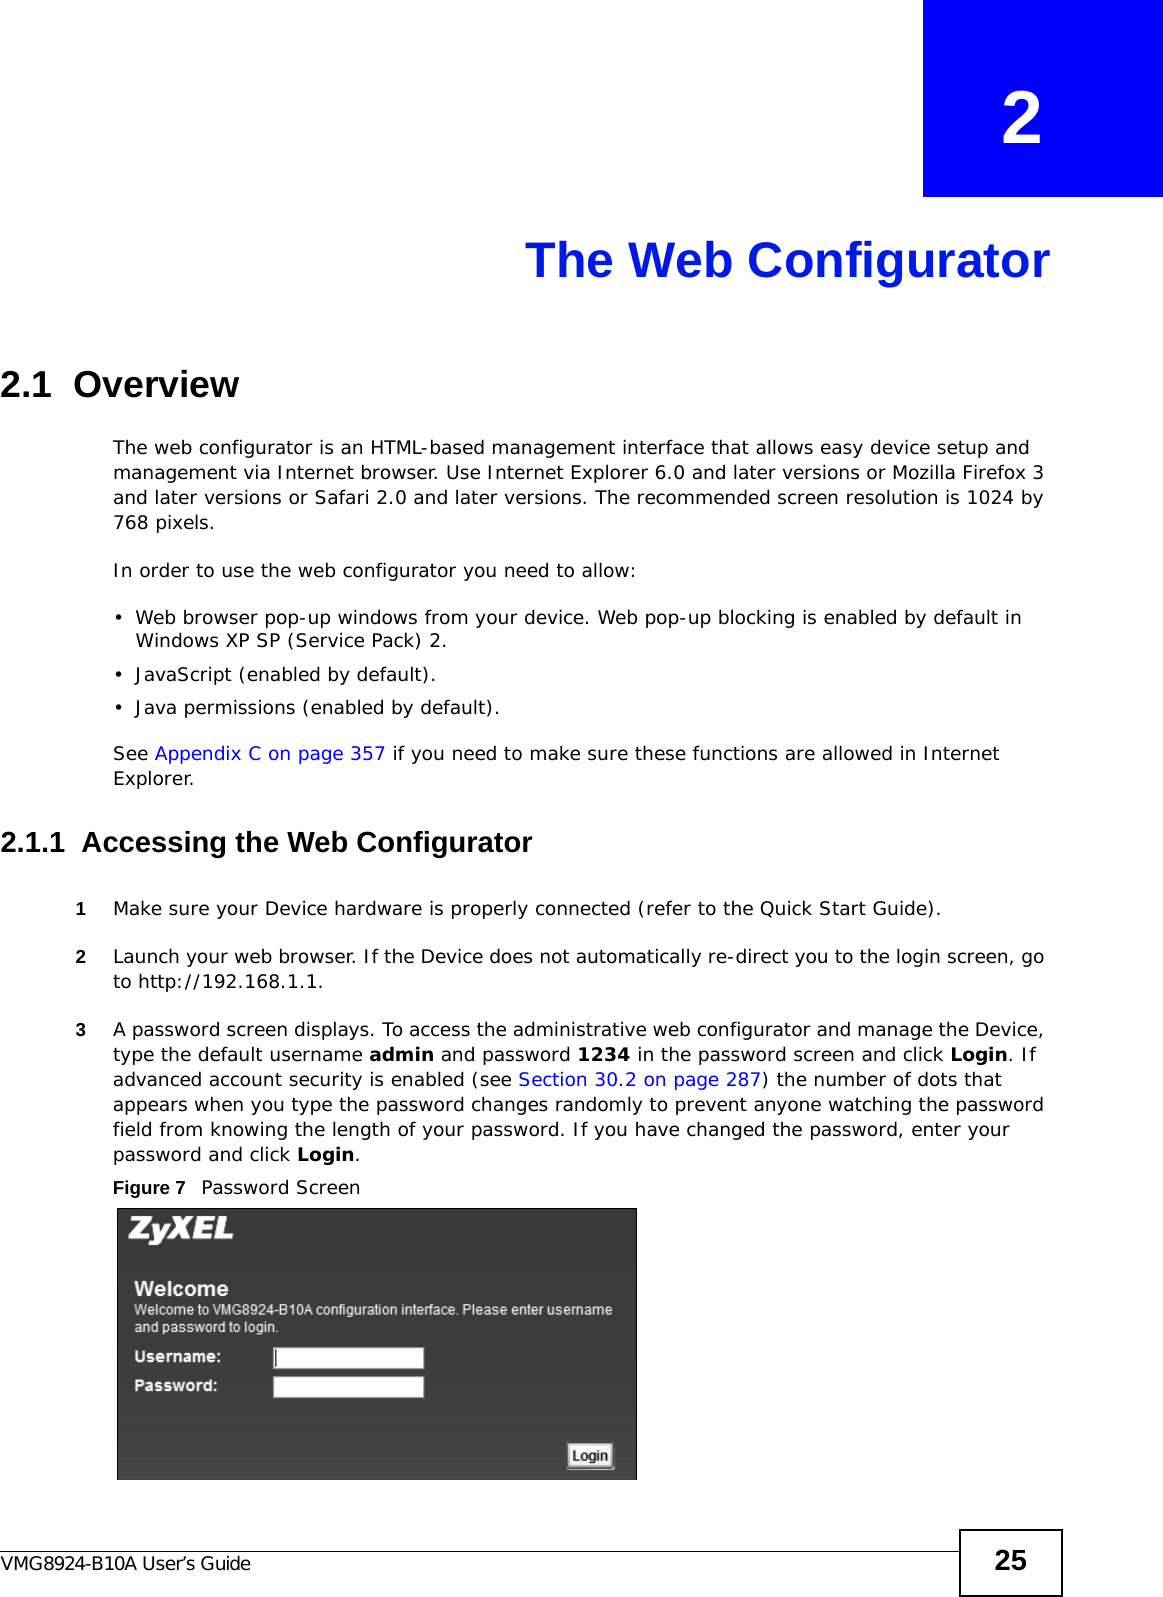 VMG8924-B10A User’s Guide 25CHAPTER   2The Web Configurator2.1  OverviewThe web configurator is an HTML-based management interface that allows easy device setup and management via Internet browser. Use Internet Explorer 6.0 and later versions or Mozilla Firefox 3 and later versions or Safari 2.0 and later versions. The recommended screen resolution is 1024 by 768 pixels.In order to use the web configurator you need to allow:• Web browser pop-up windows from your device. Web pop-up blocking is enabled by default in Windows XP SP (Service Pack) 2.• JavaScript (enabled by default).• Java permissions (enabled by default).See Appendix C on page 357 if you need to make sure these functions are allowed in Internet Explorer. 2.1.1  Accessing the Web Configurator1Make sure your Device hardware is properly connected (refer to the Quick Start Guide).2Launch your web browser. If the Device does not automatically re-direct you to the login screen, go to http://192.168.1.1.3A password screen displays. To access the administrative web configurator and manage the Device, type the default username admin and password 1234 in the password screen and click Login. If advanced account security is enabled (see Section 30.2 on page 287) the number of dots that appears when you type the password changes randomly to prevent anyone watching the password field from knowing the length of your password. If you have changed the password, enter your password and click Login. Figure 7   Password Screen